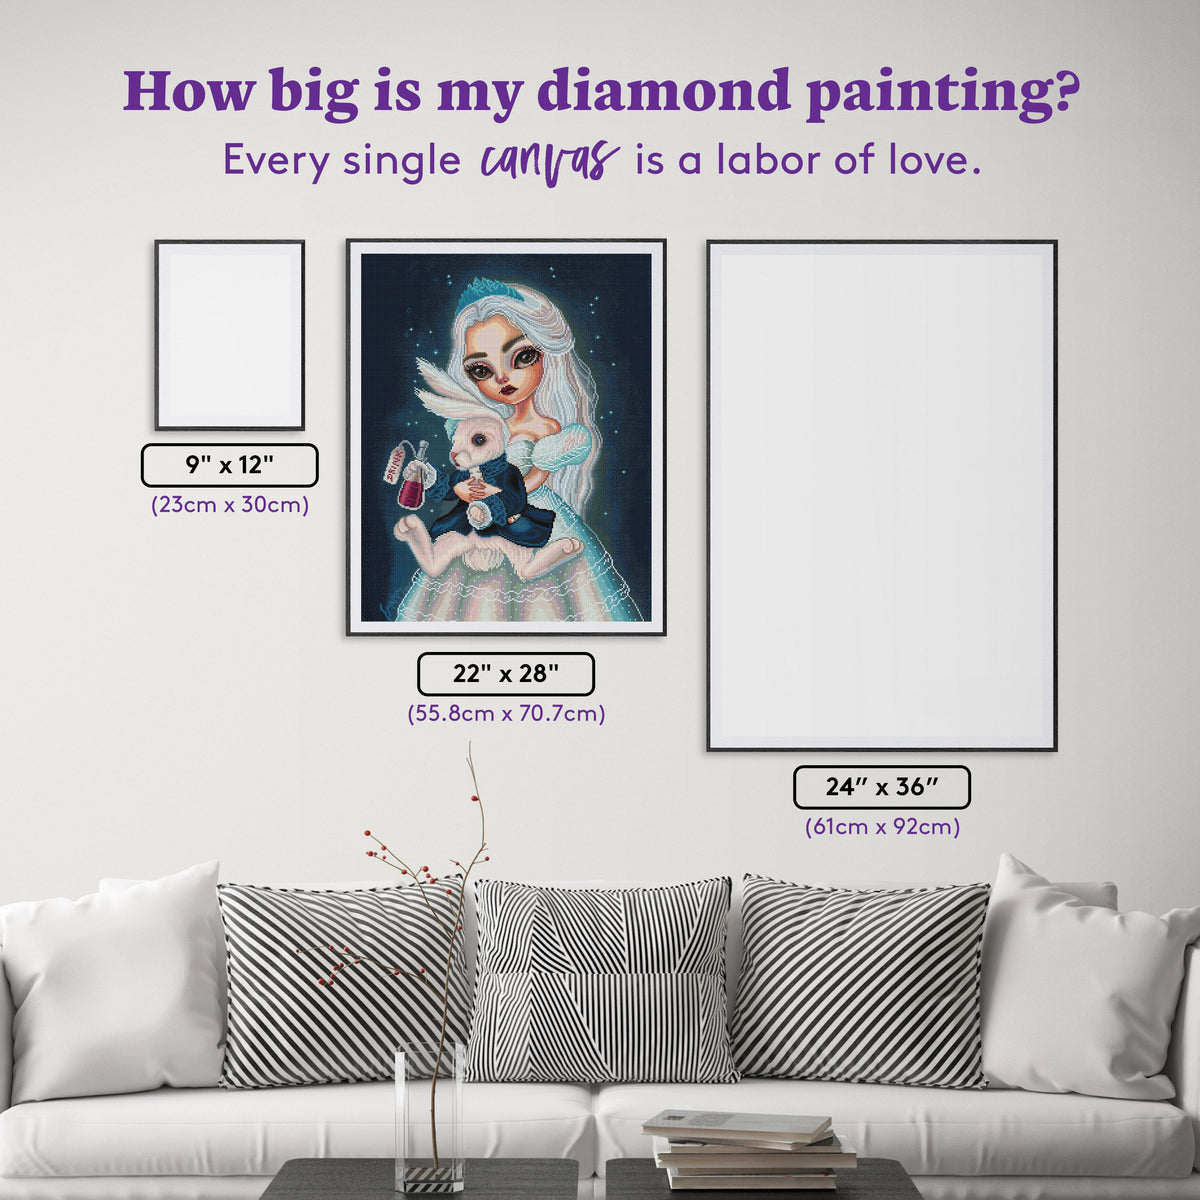 Diamond Painting White Queen 22" x 28" (55.8cm x 70.7cm) / Square with 62 Colors including 3 Fairy Dust Diamonds / 63,616